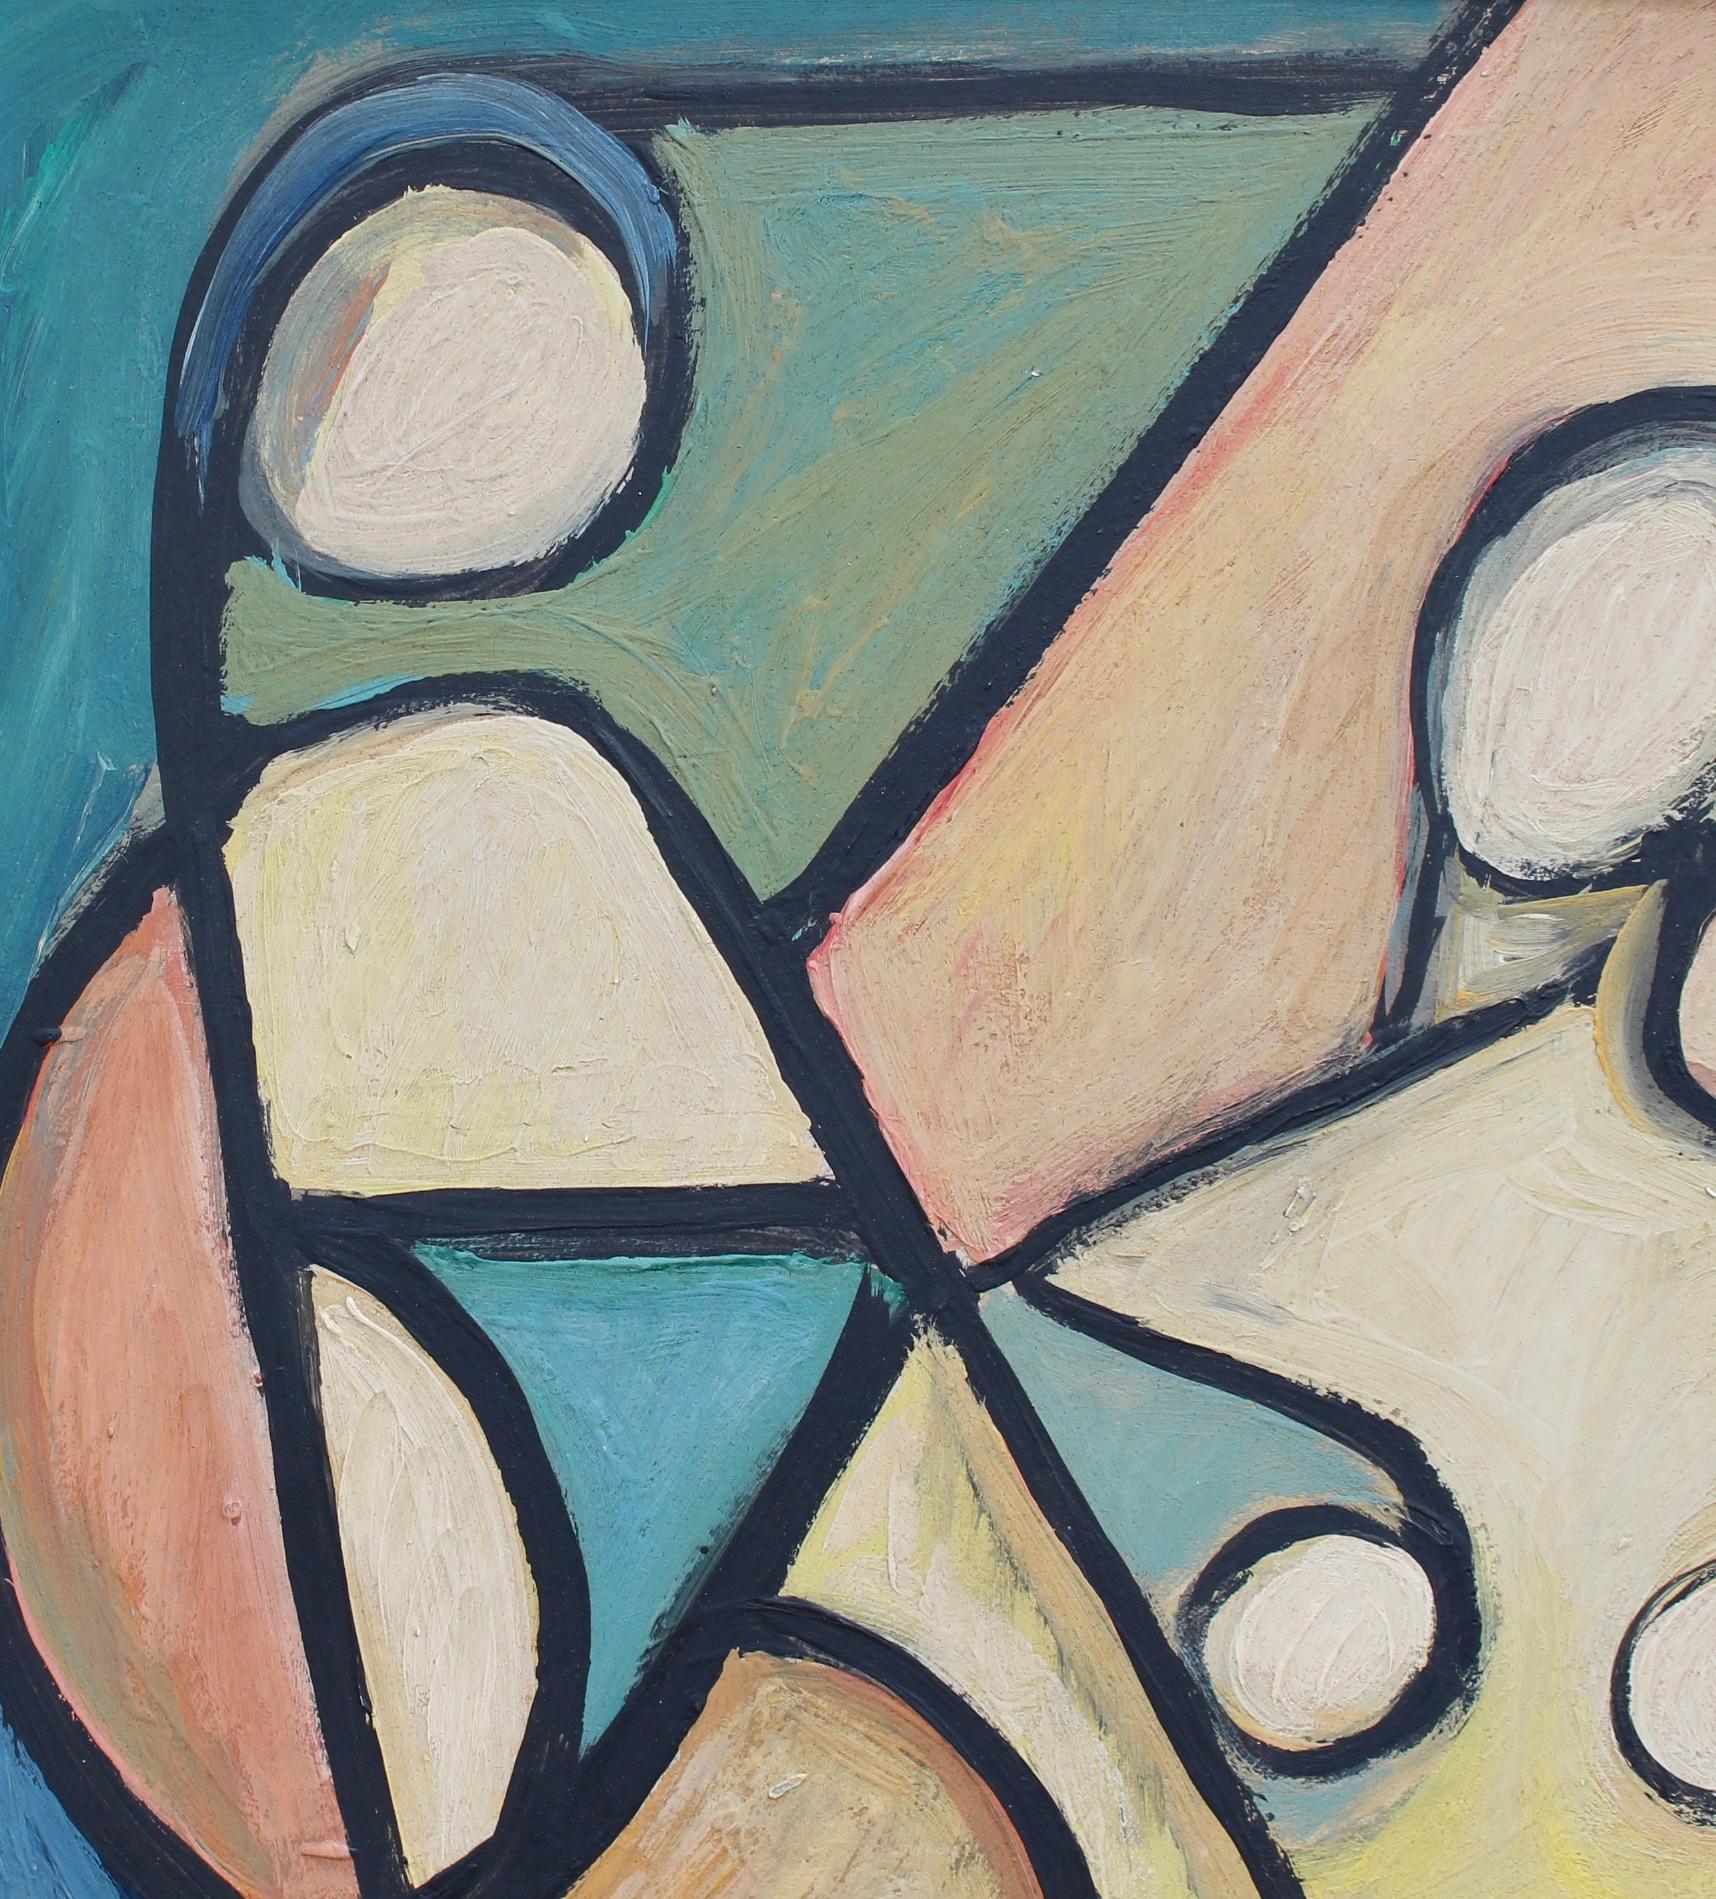 'Cubist Figures in Colour', oil on board, by STM (circa 1960s). A vibrant modern painting inspired by Picasso and Braque, the artist uses angles, lines and vibrant colours to create an entirely new dimension to painting. Cubists abandoned